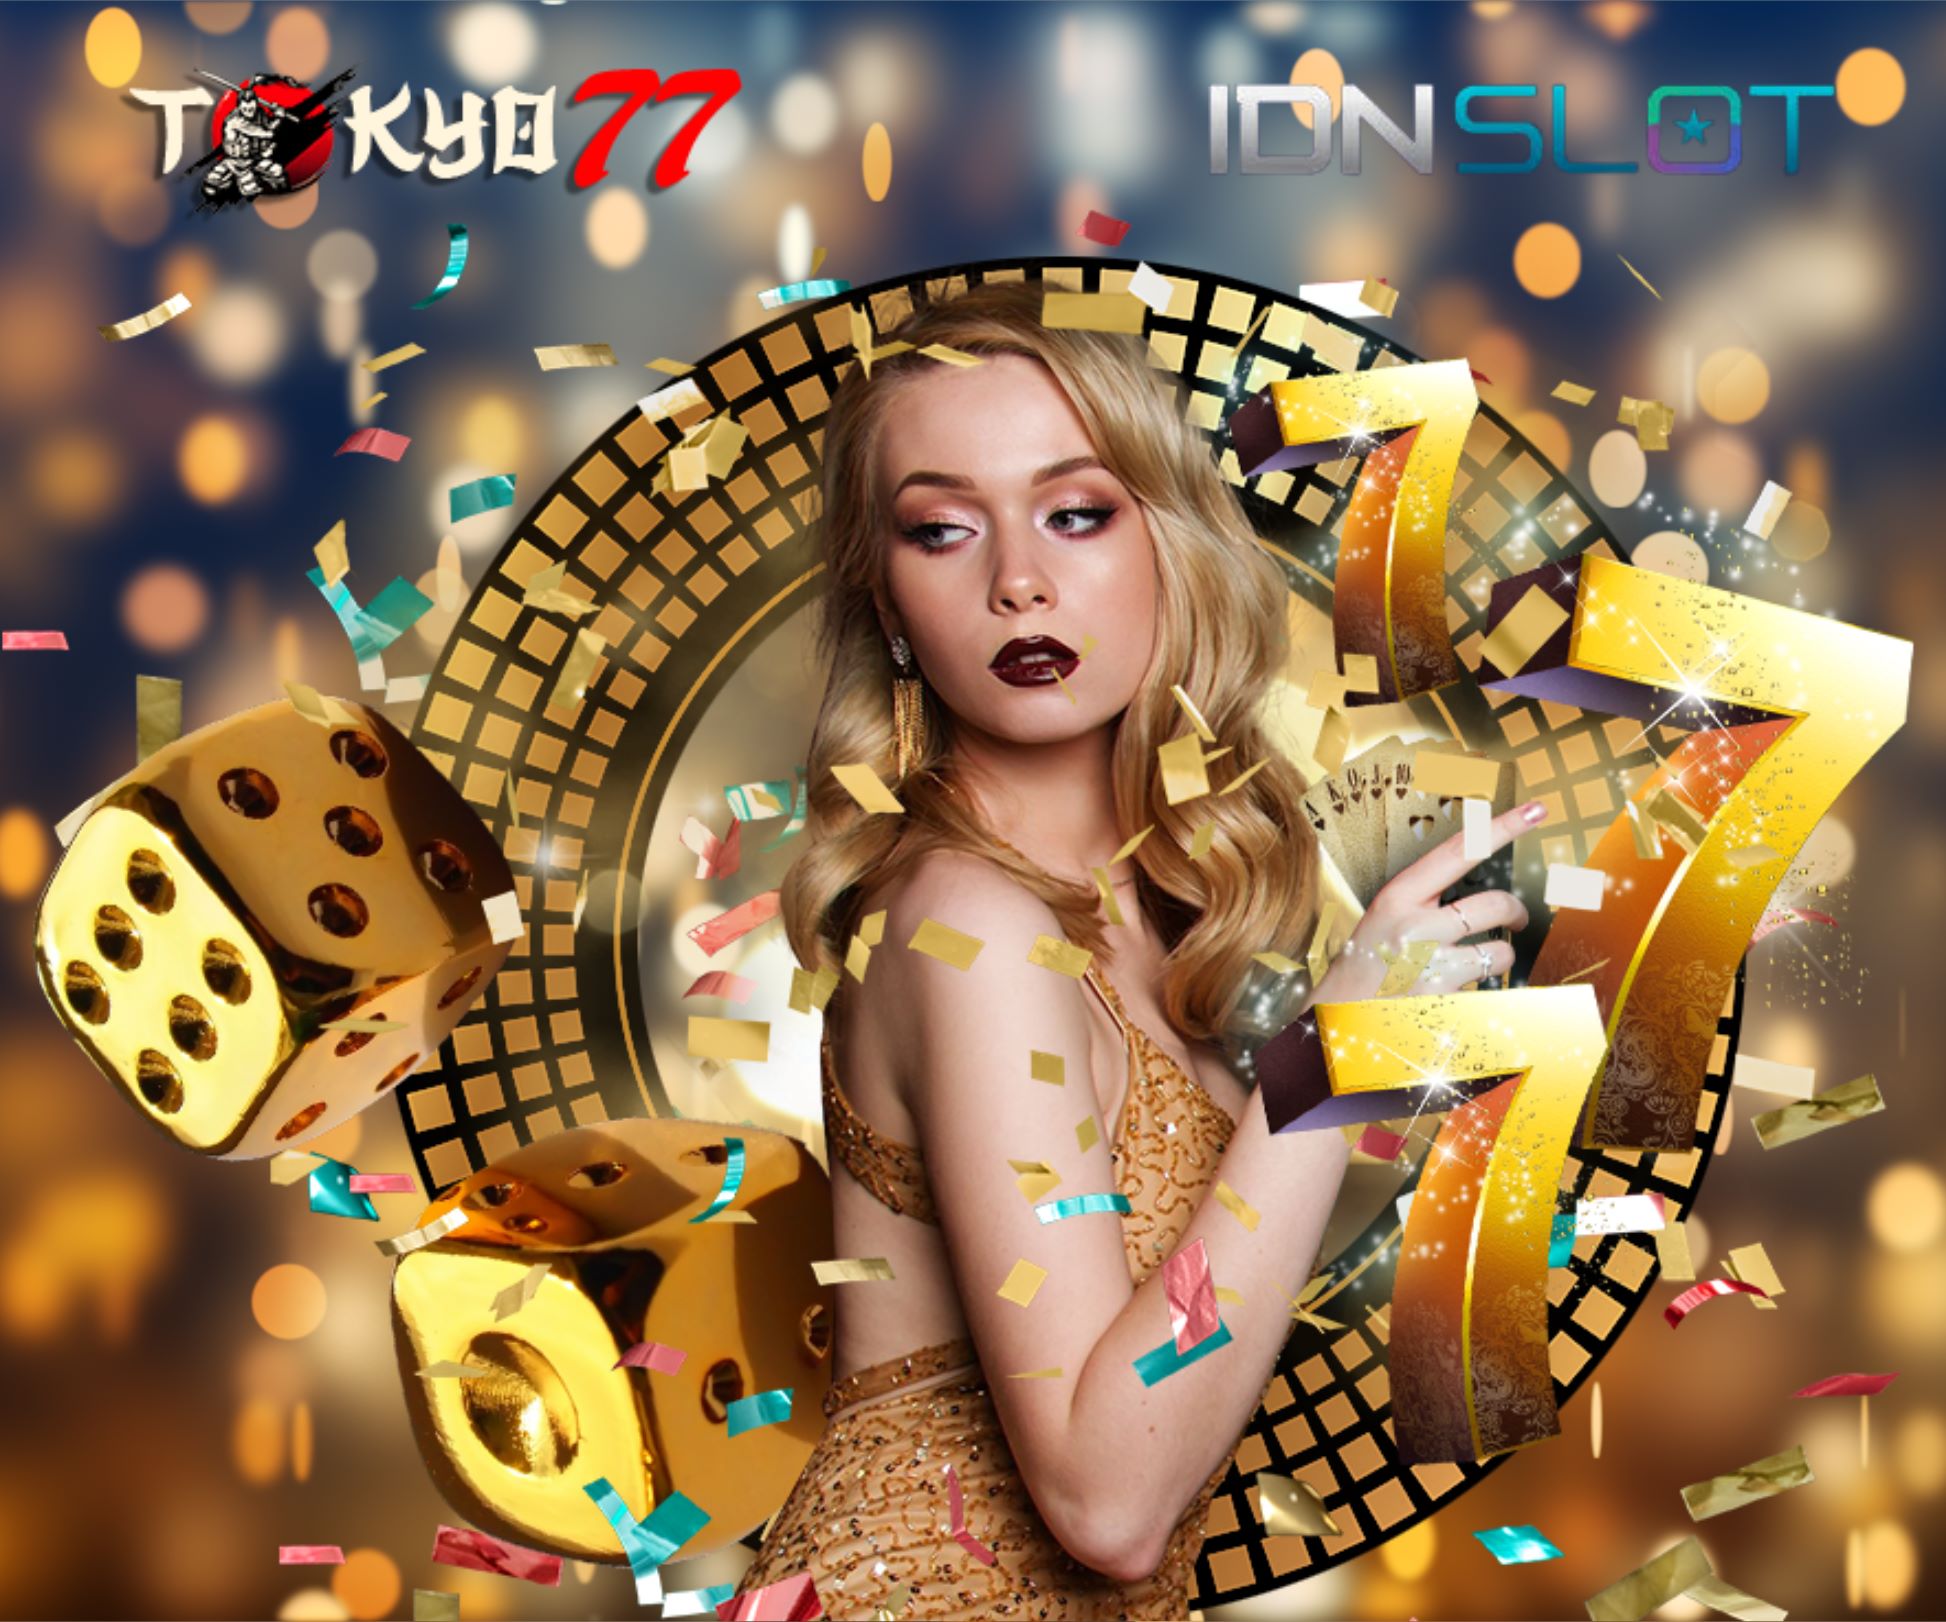 IDN Slot: Slot provider that makes it easy to win the jackpot